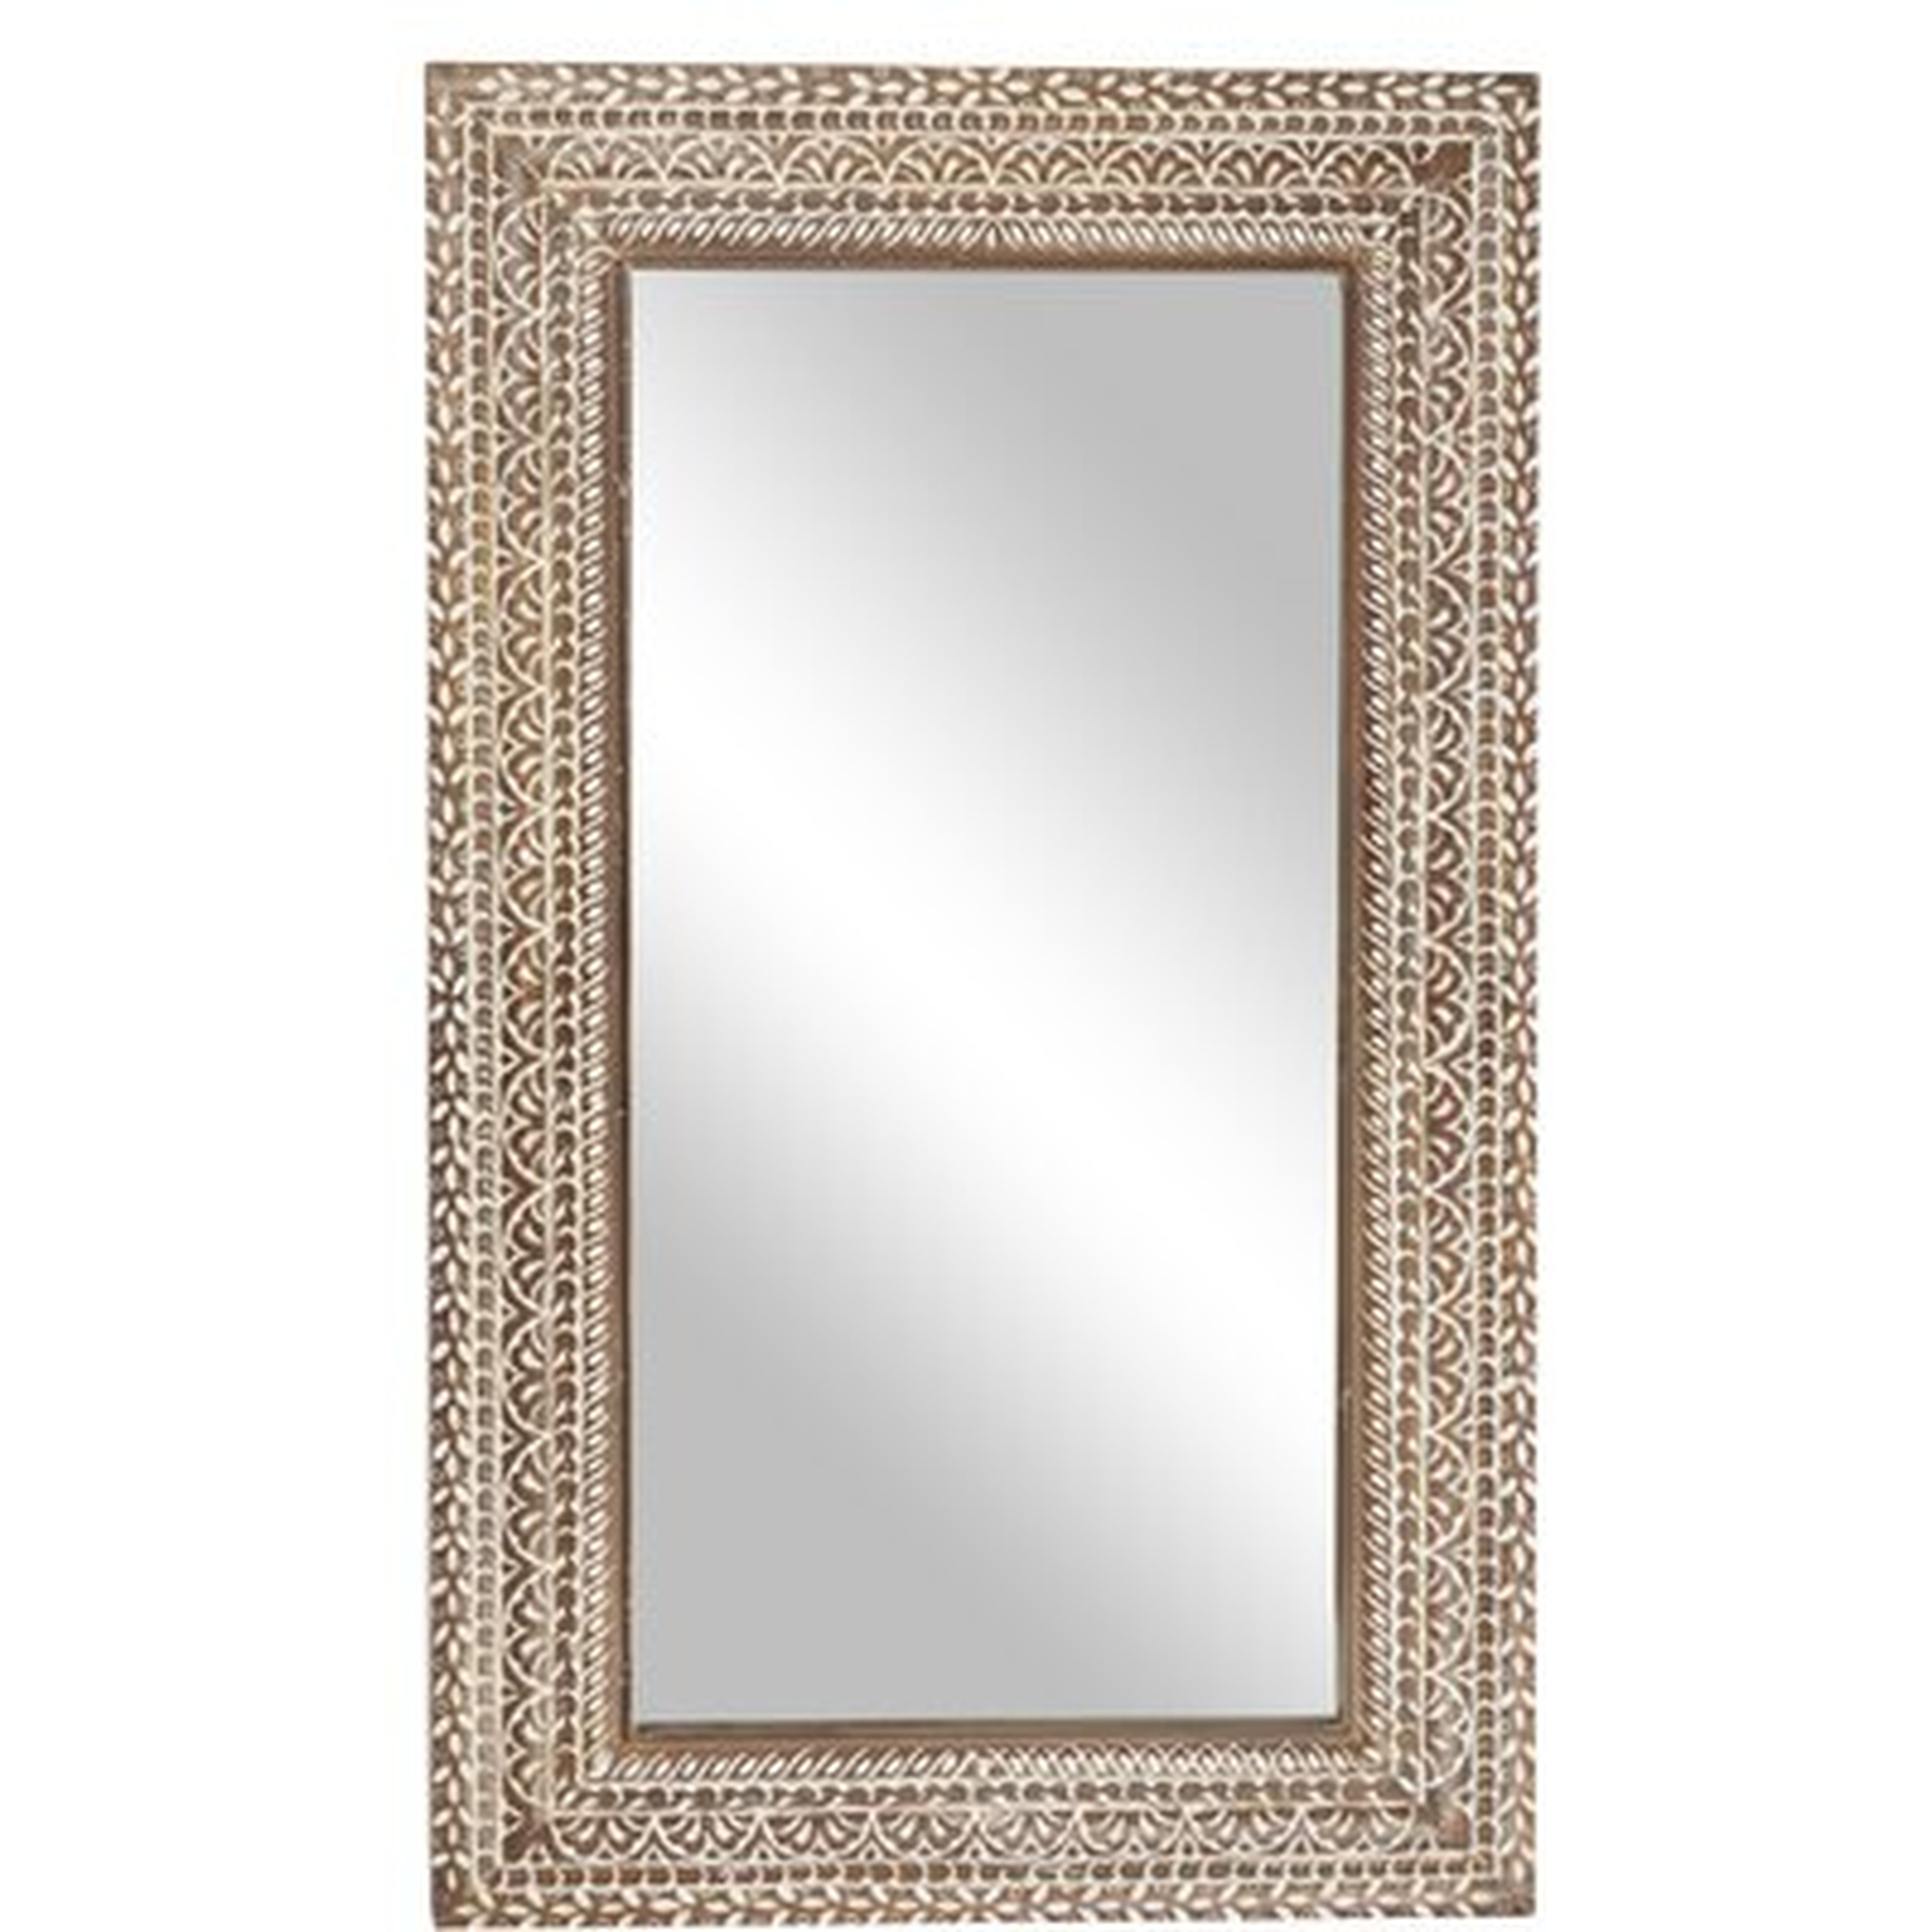 Extra Large Rectangular Brown And White Carved Wood Wall Mirror, 36" X 60" - Wayfair